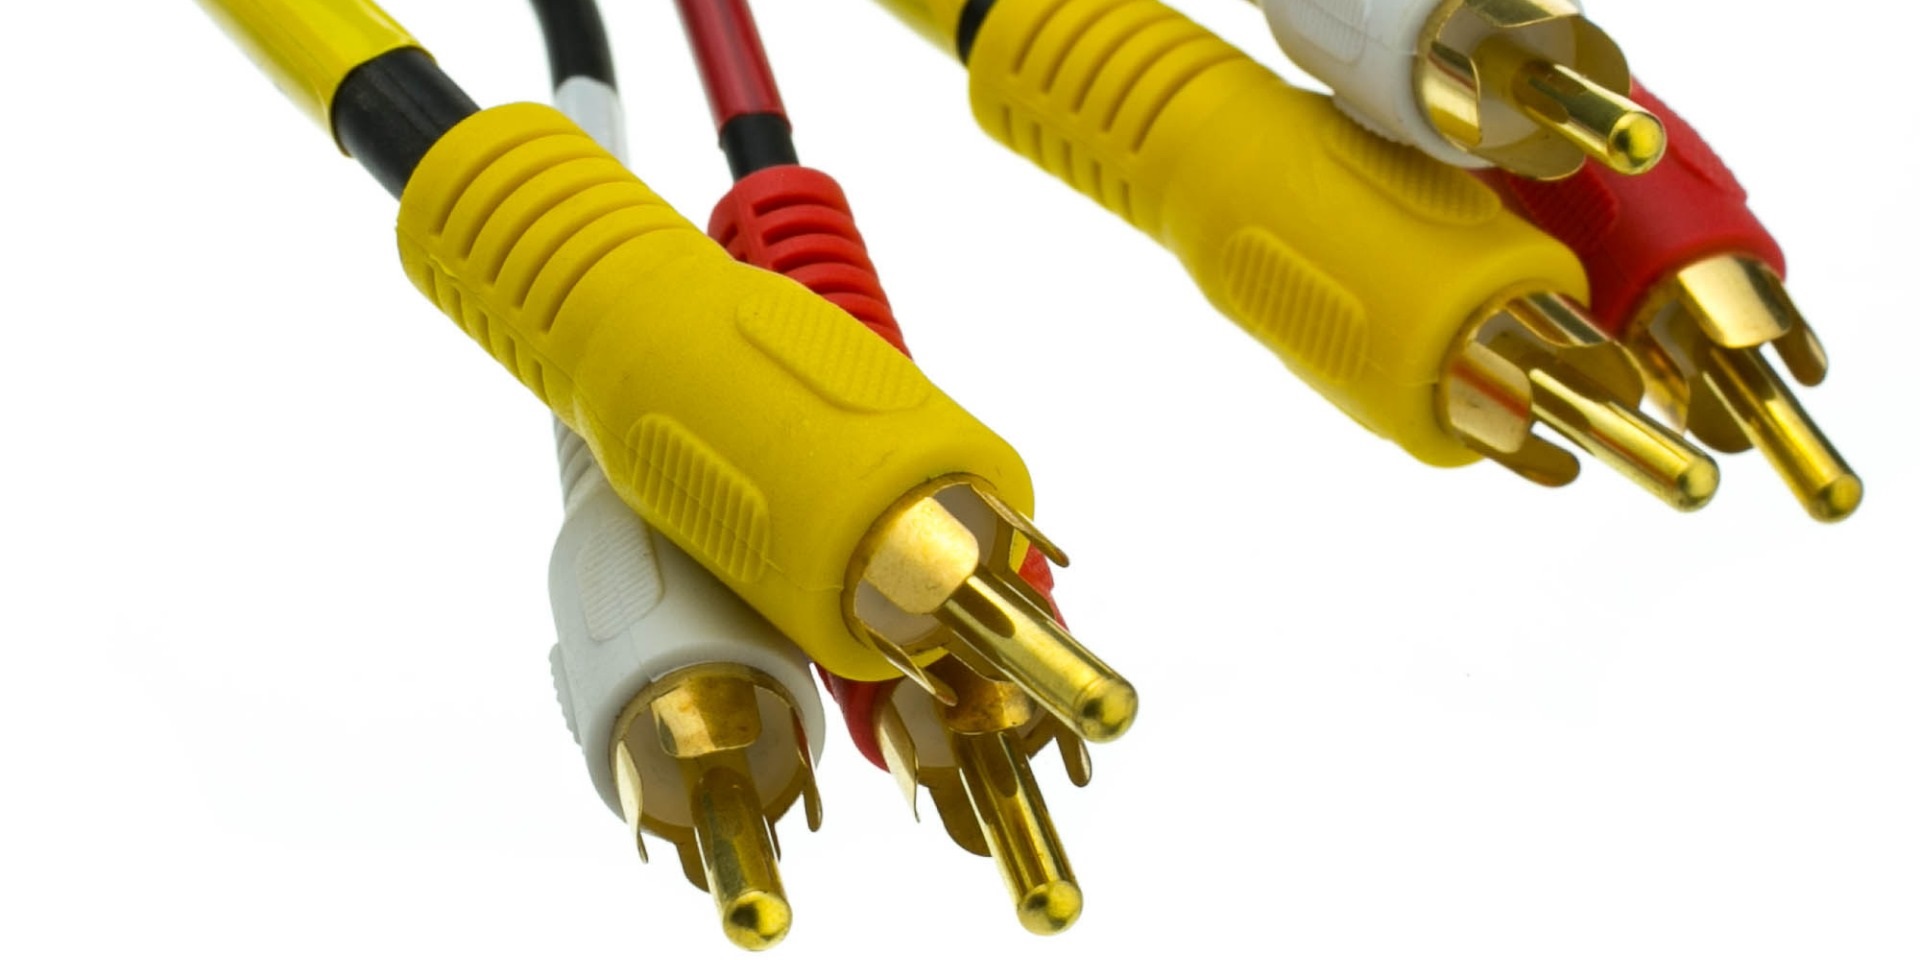 https://righttechadvice.com/wp-content/uploads/2021/11/stereo-rca-cable.jpg